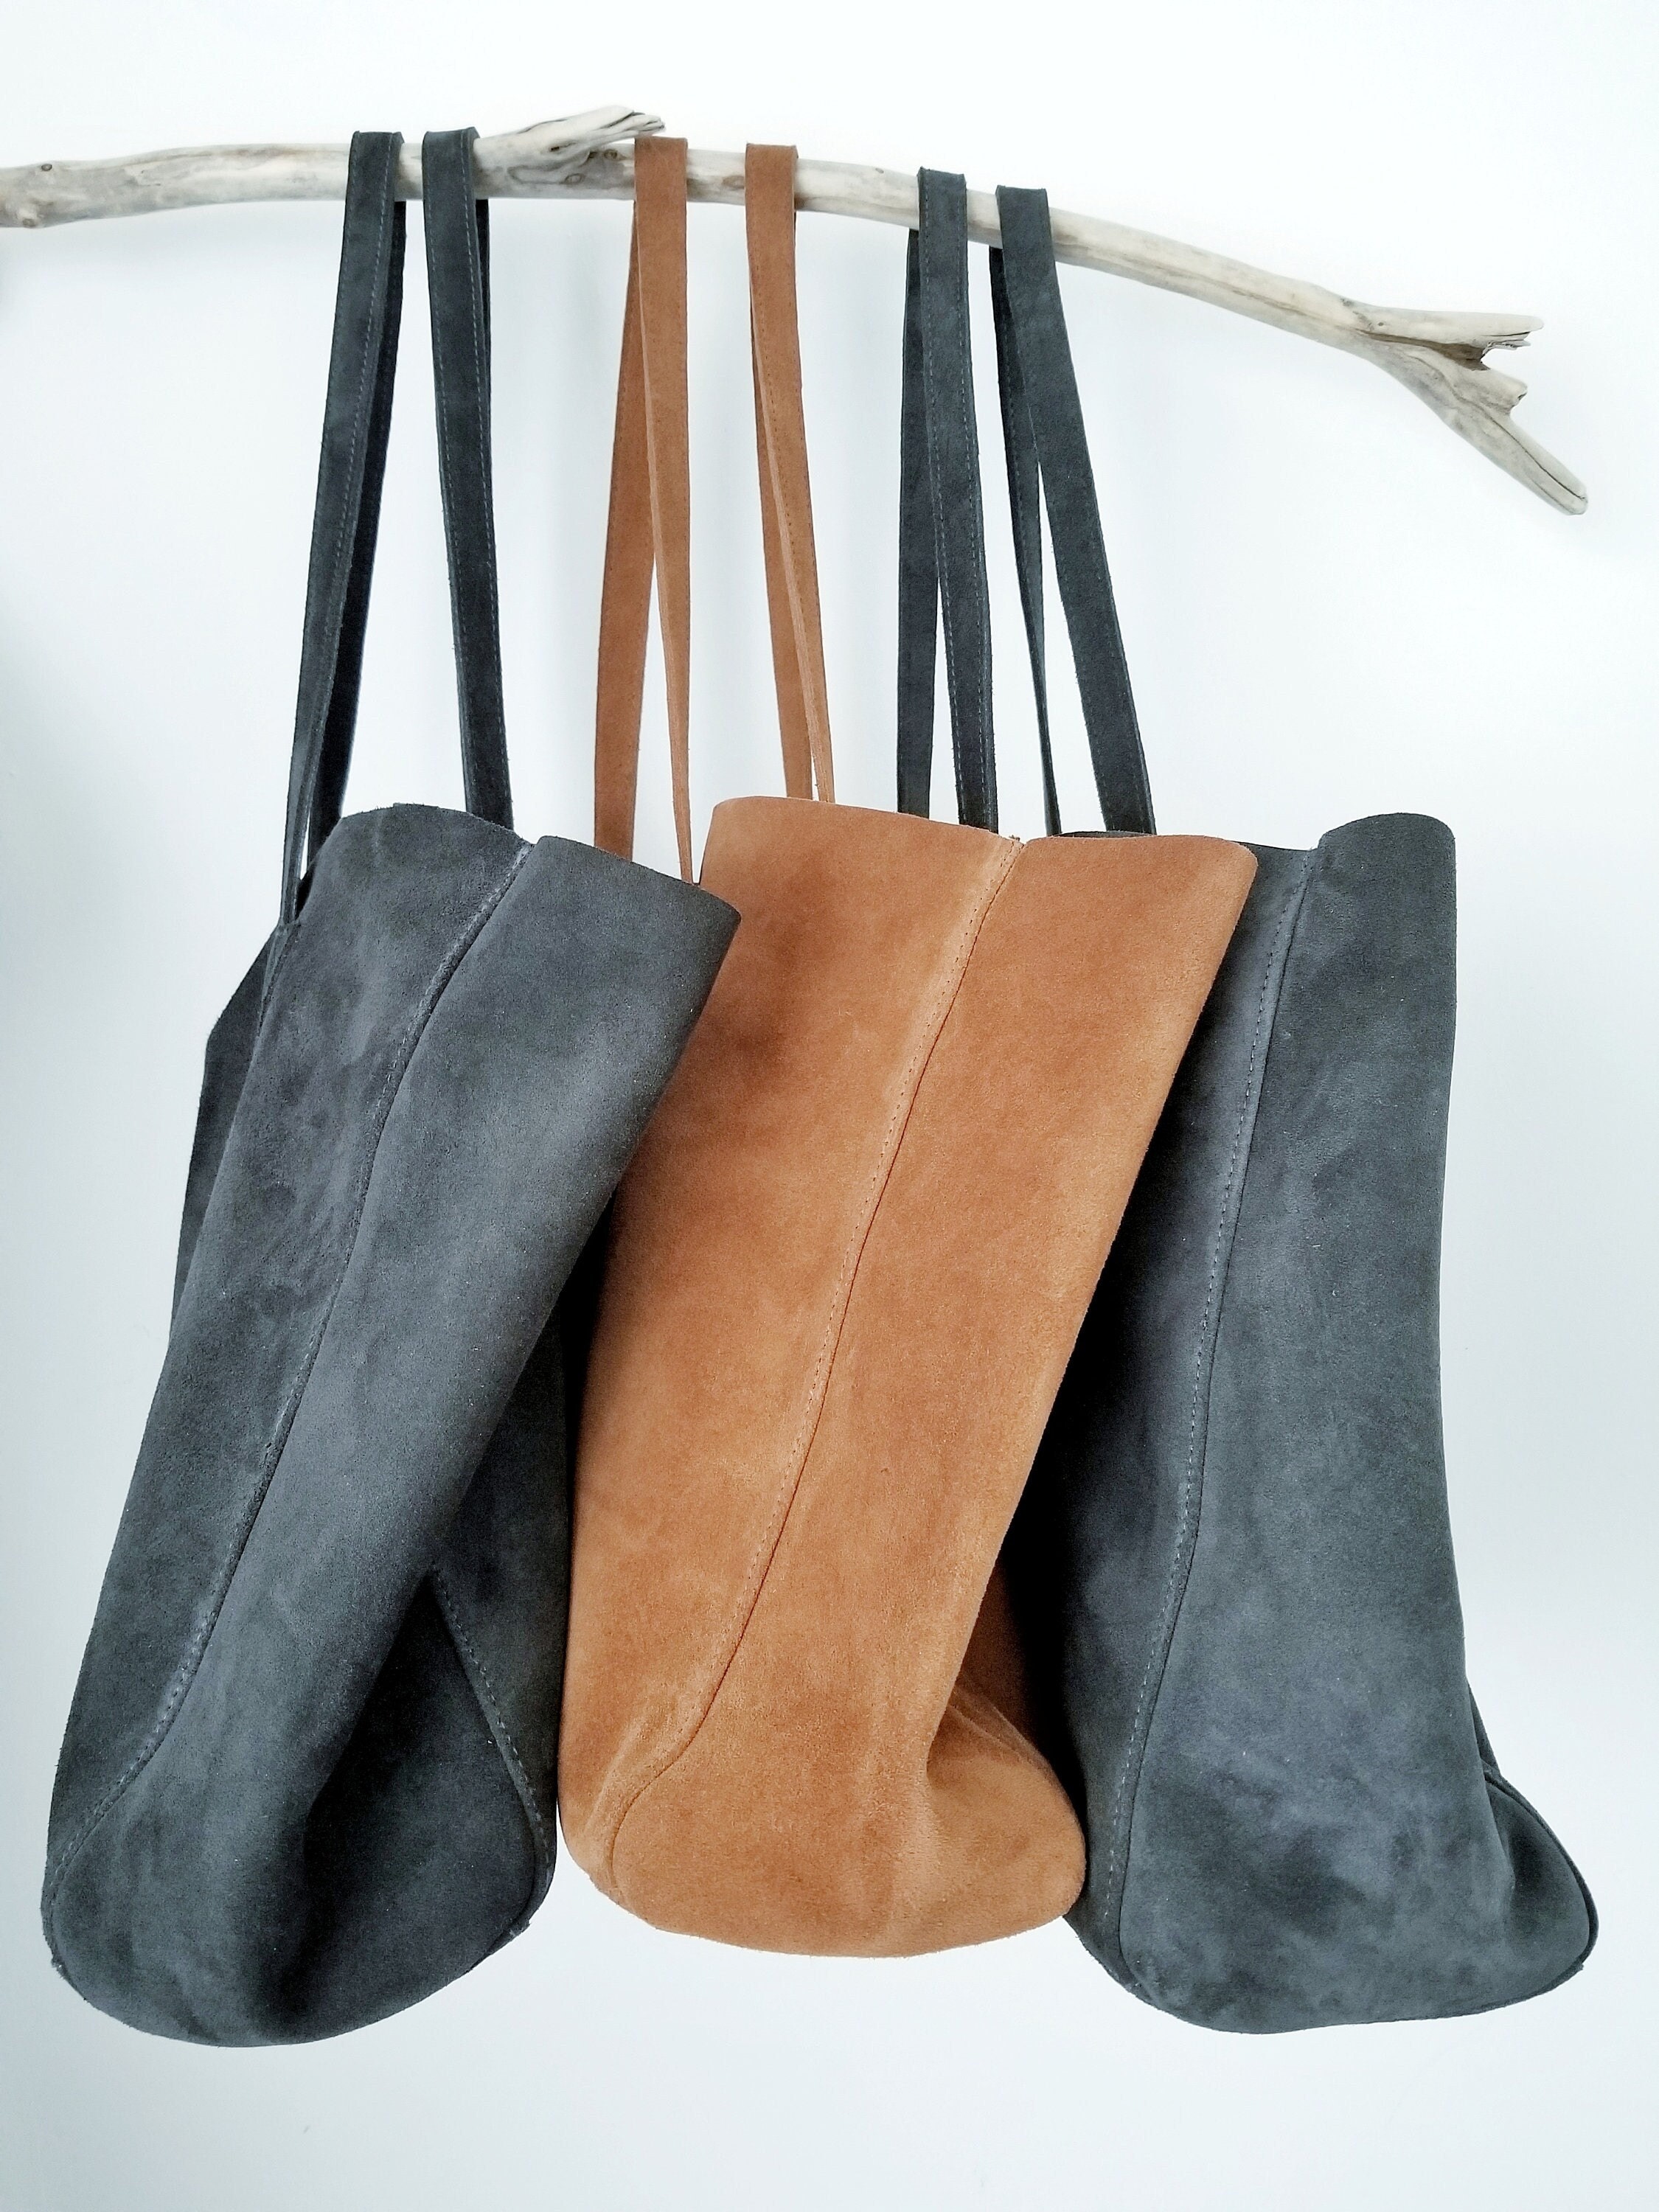 Large TOTE leather bag in light GRAY. Soft natural suede bag